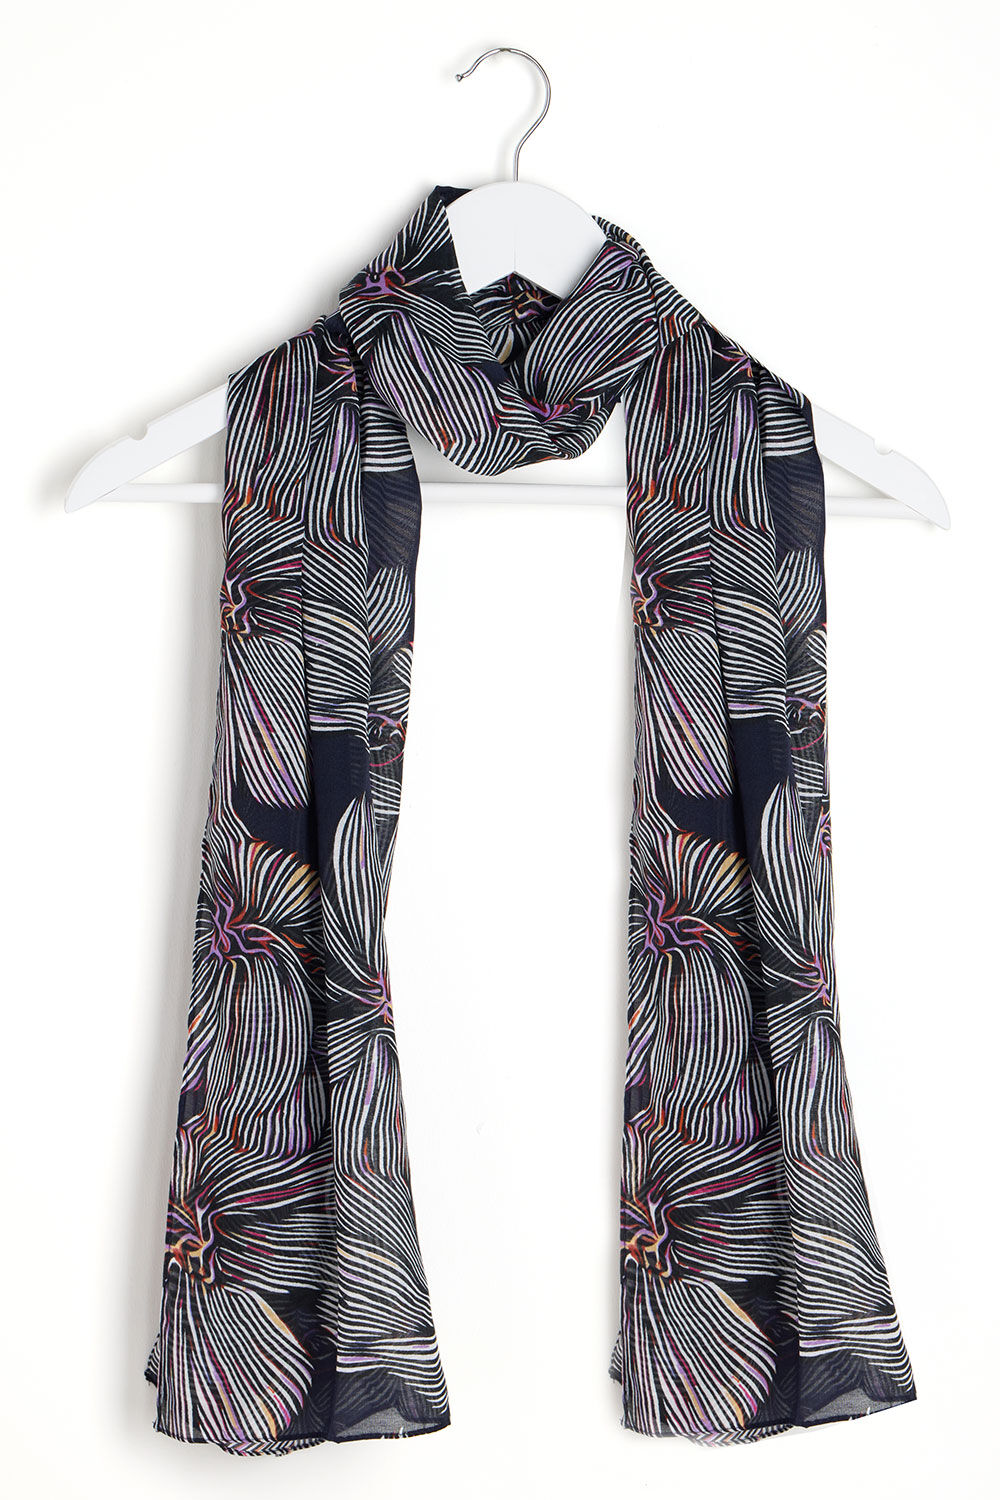 Bonmarche Large Linear Floral Print Lightweight Scarf